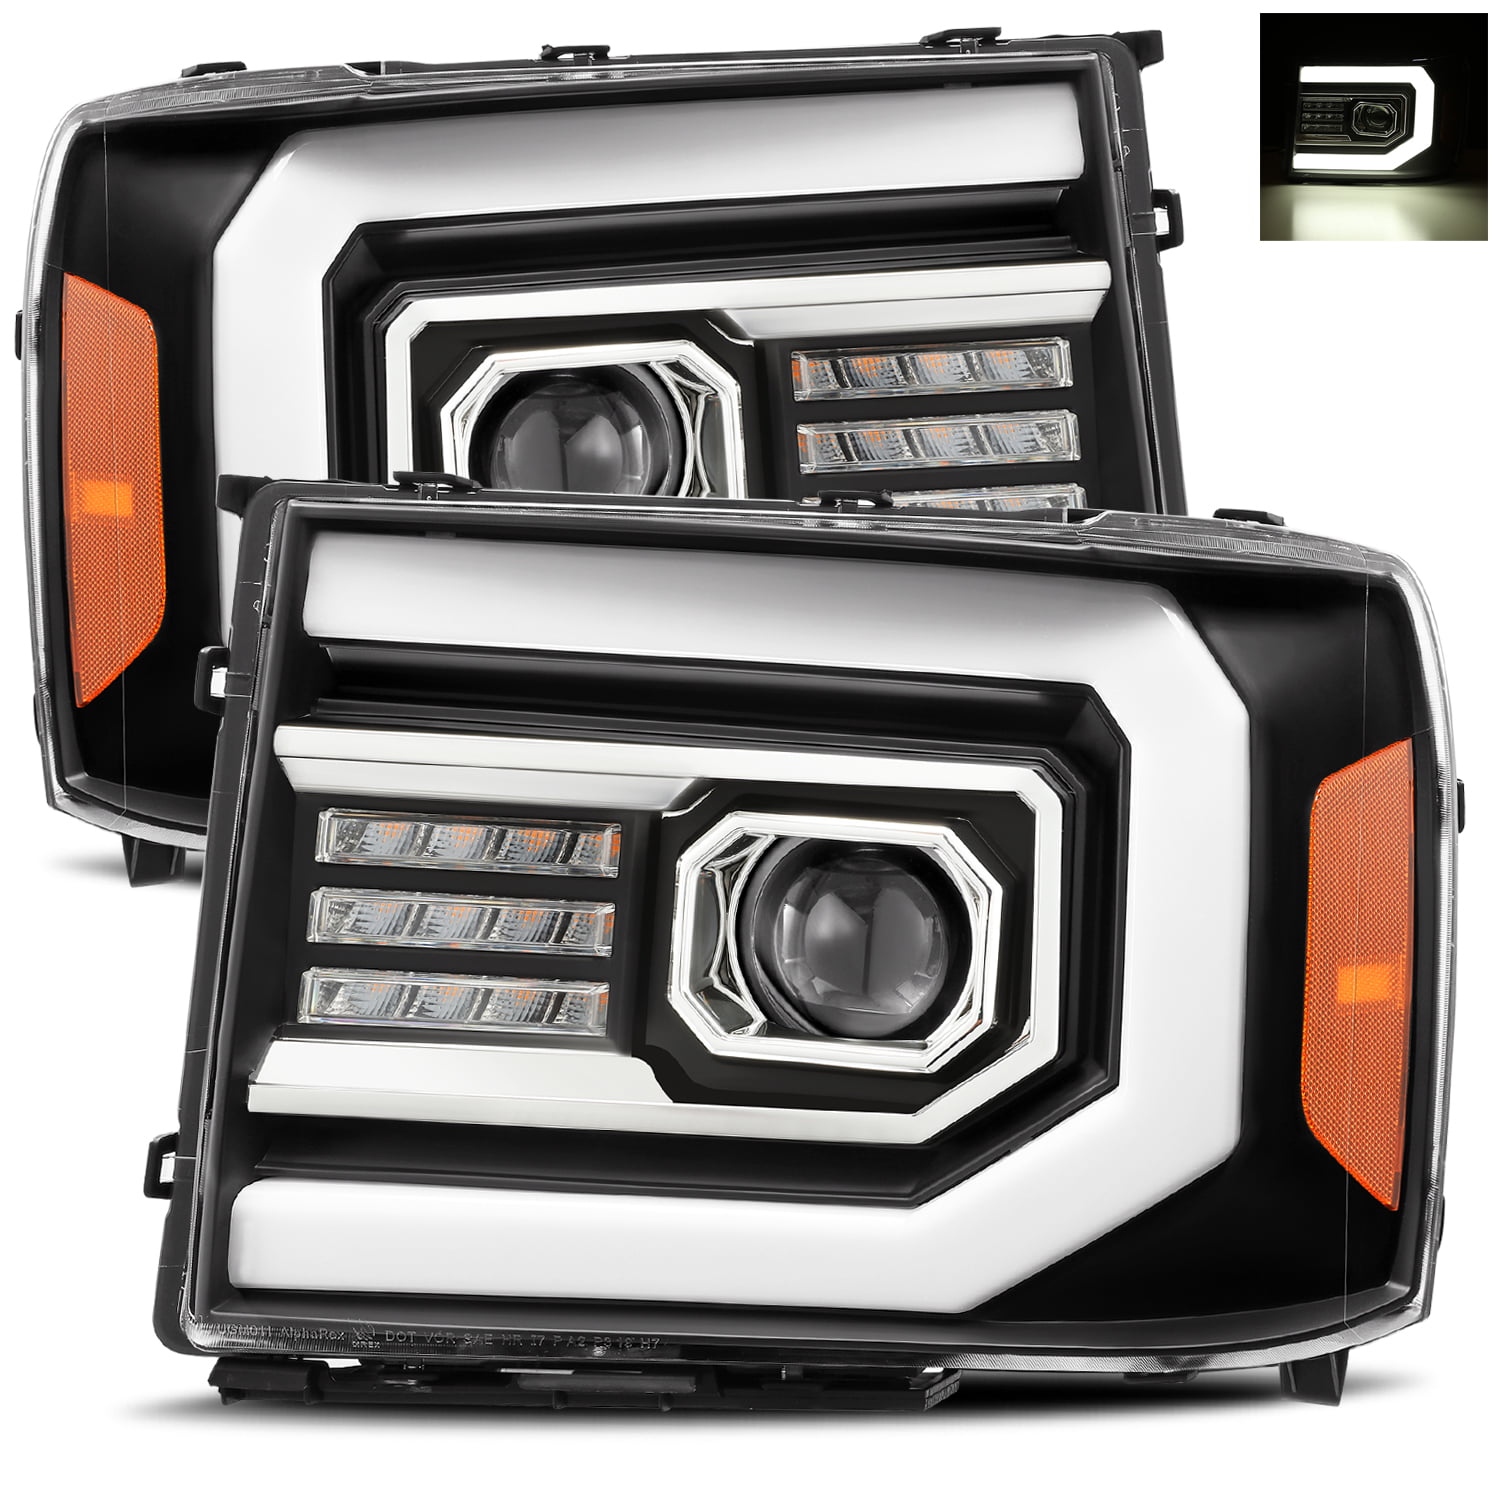 DWVO Projector headlights assembly Compatible with 2007-2013 GMC Sierra 1500/ GMC Sierra 2500HD 3500HD 2007 2008 2009 2010 2011 2012 2013 2014 Led Drl Headlamp